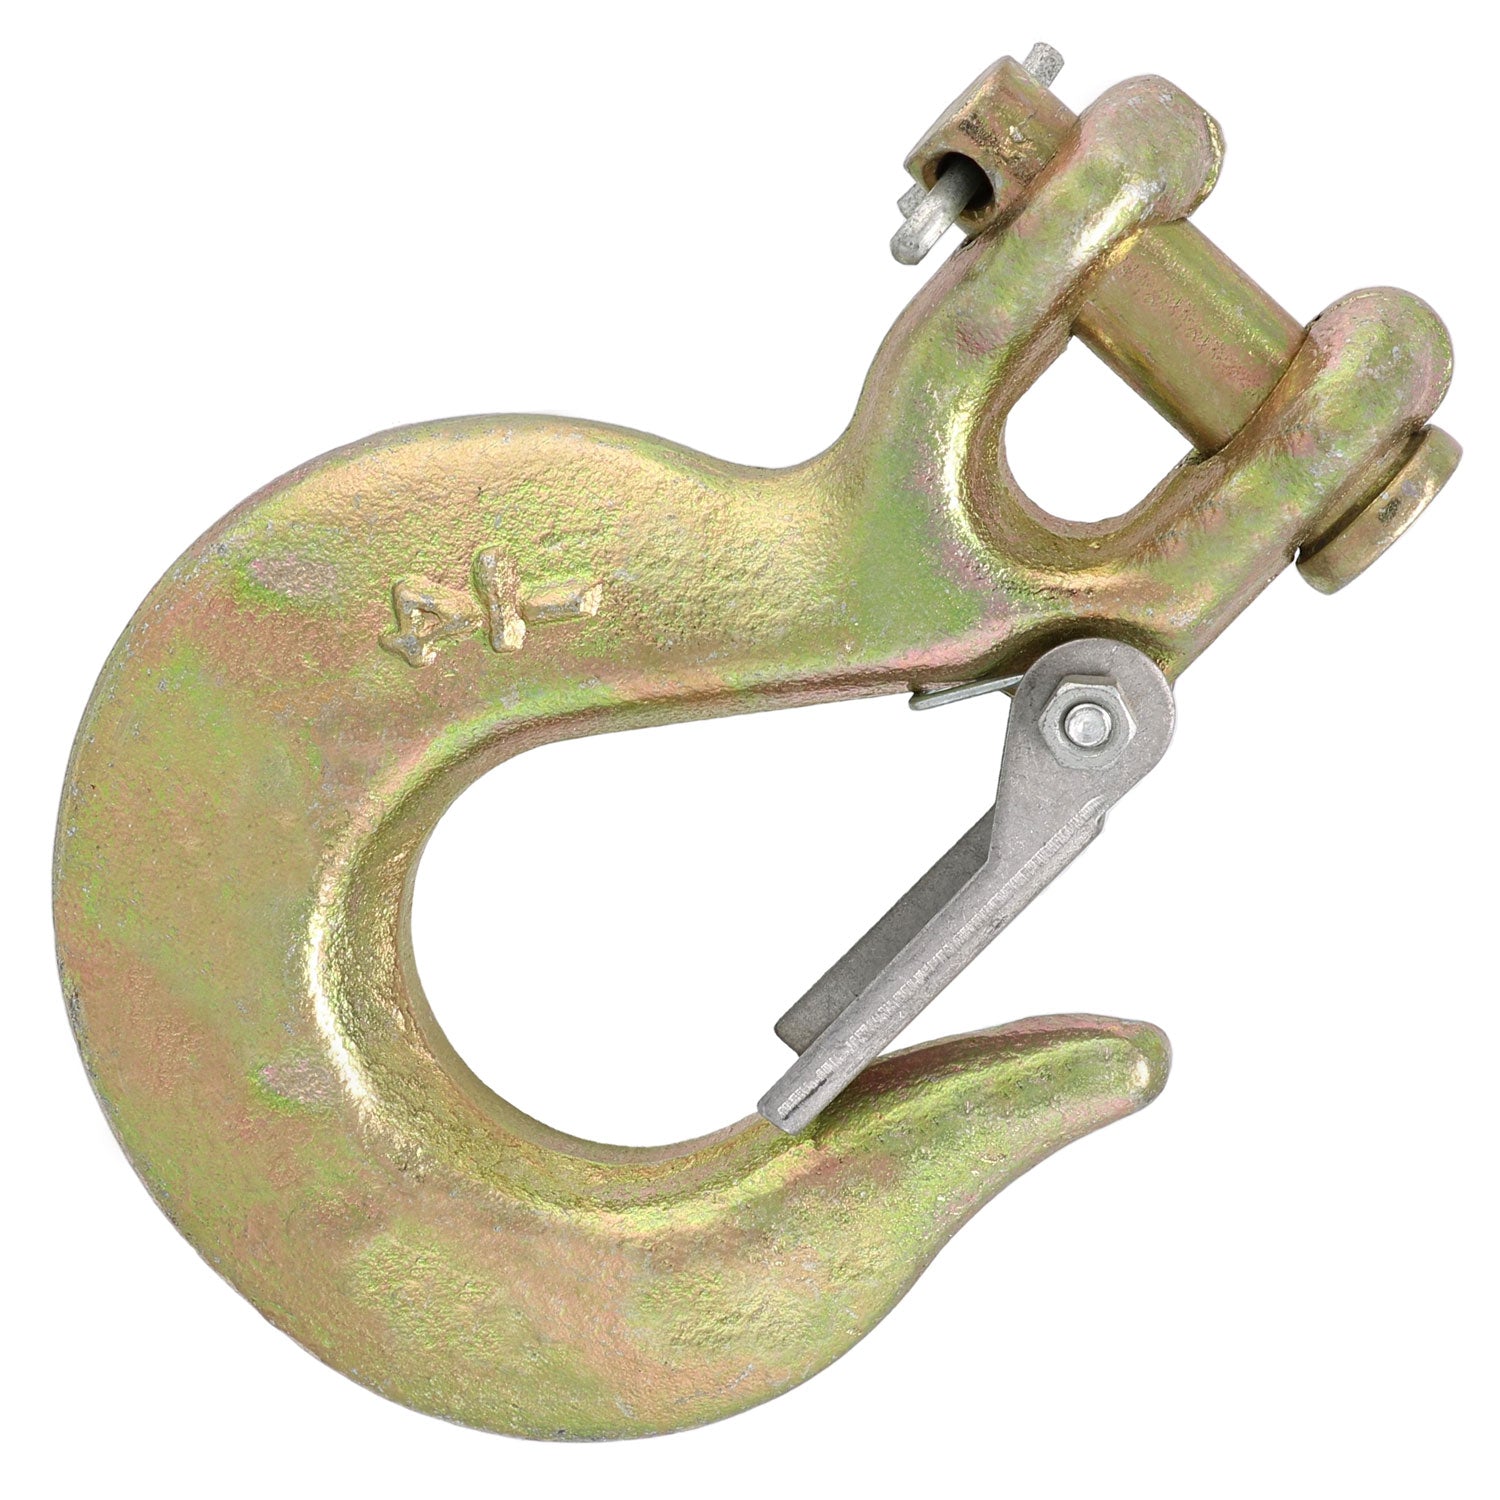 Grade 70 Clevis Slip Hook, for Transport use, Yellow Chromate